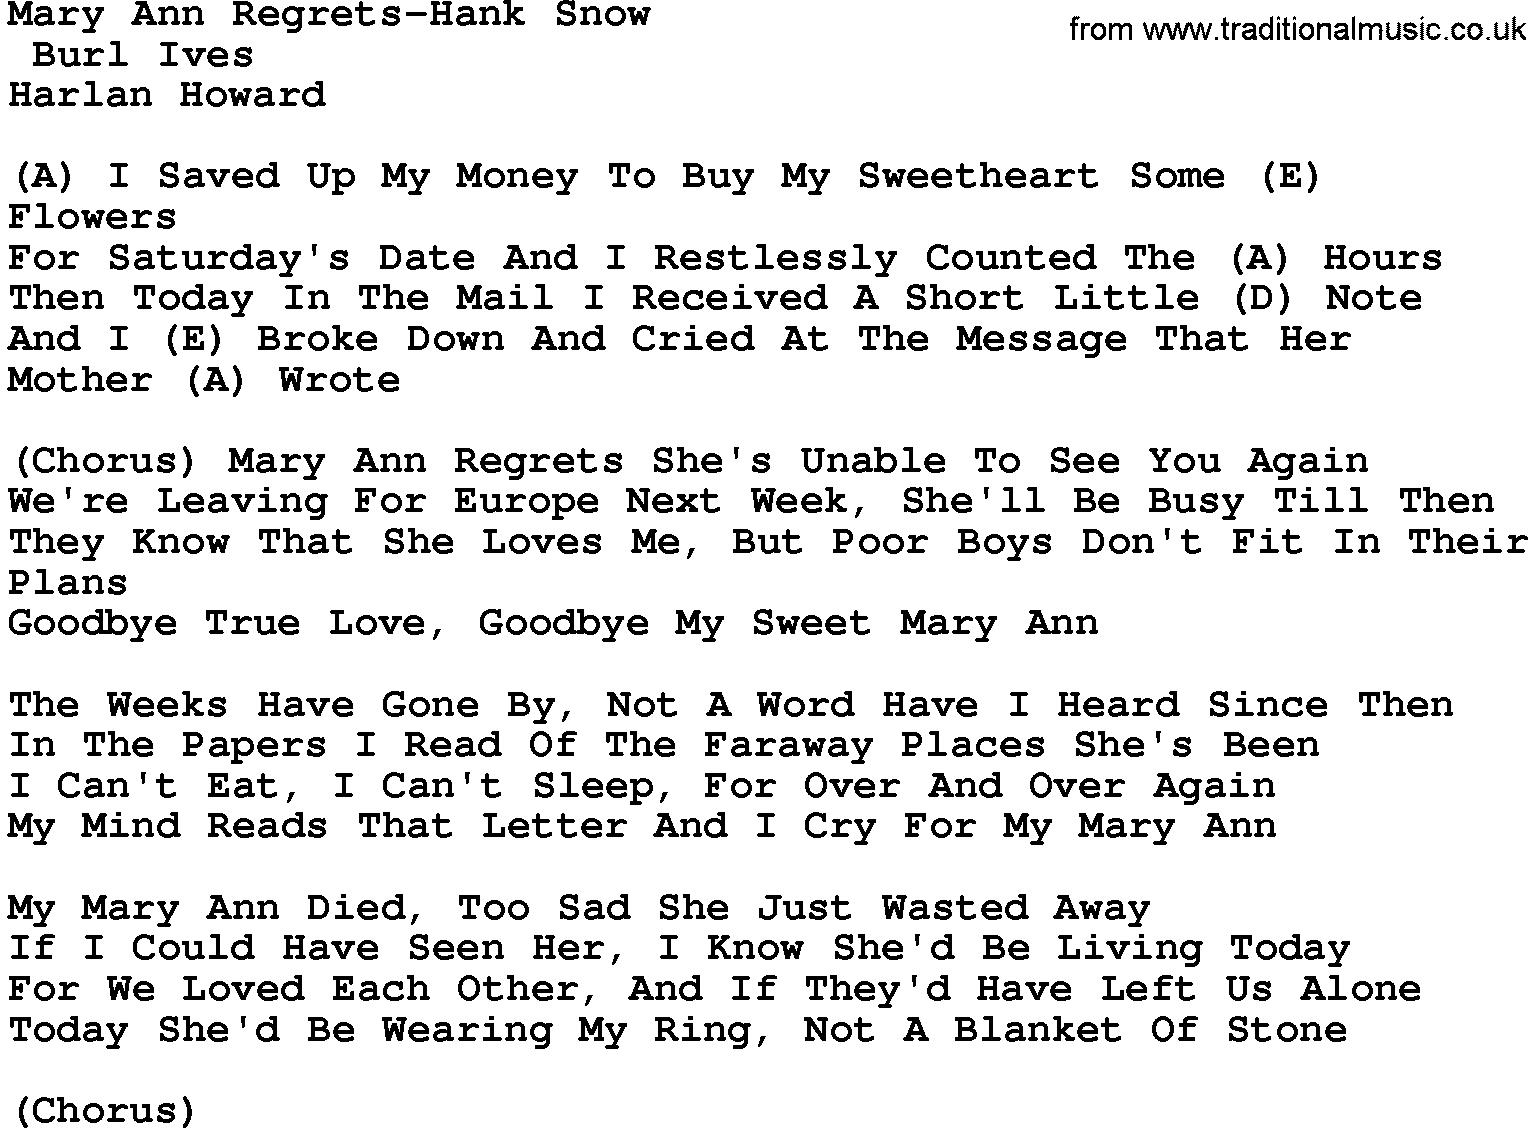 Country music song: Mary Ann Regrets-Hank Snow lyrics and chords